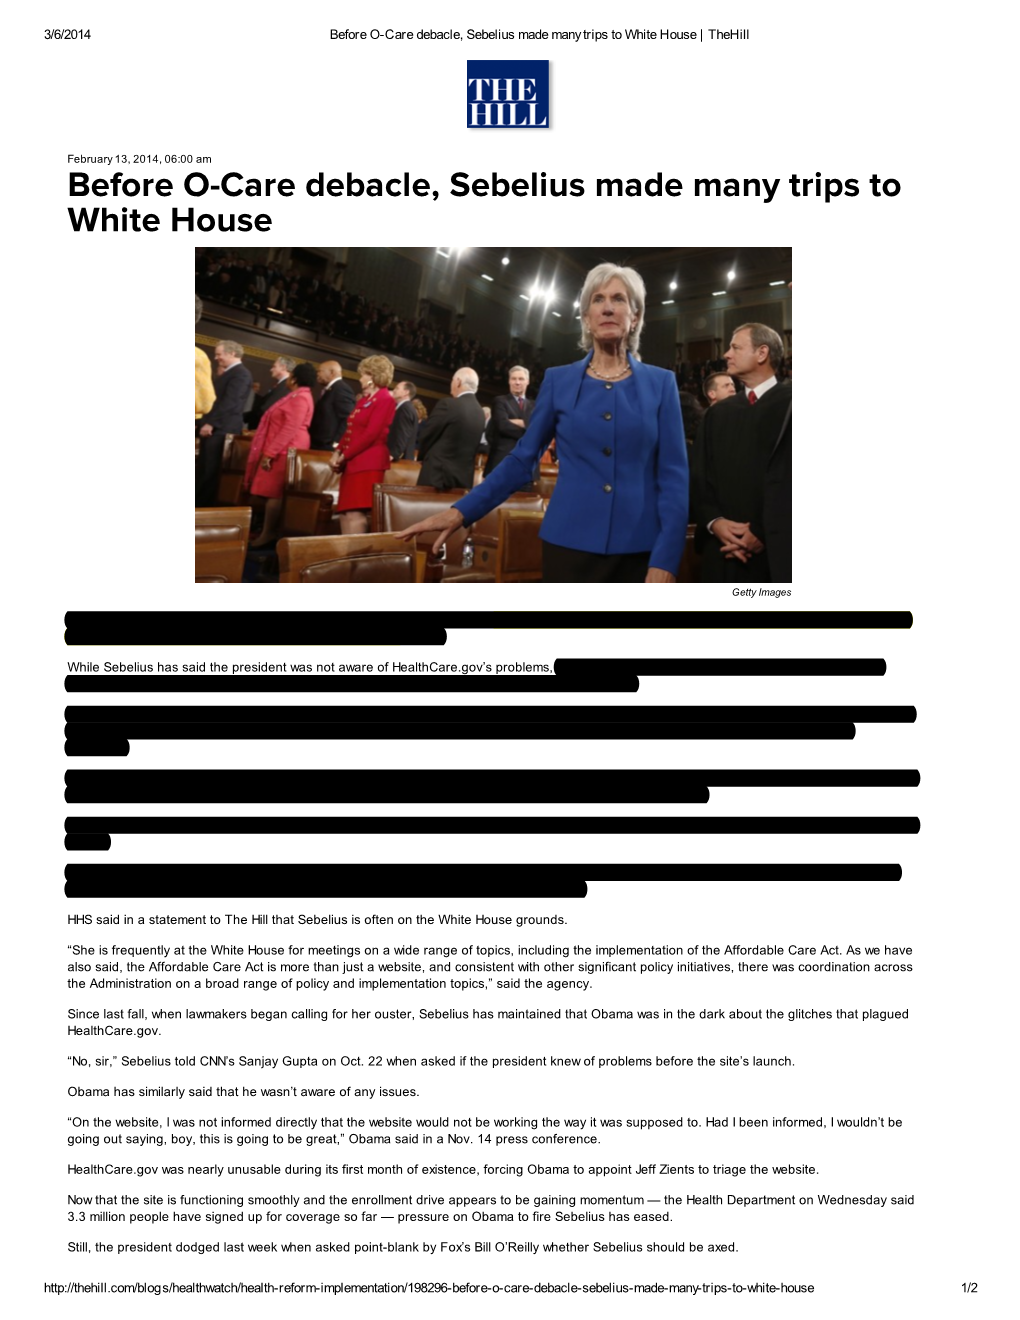 Before O-Care Debacle, Sebelius Made Many Trips to White House | Thehill